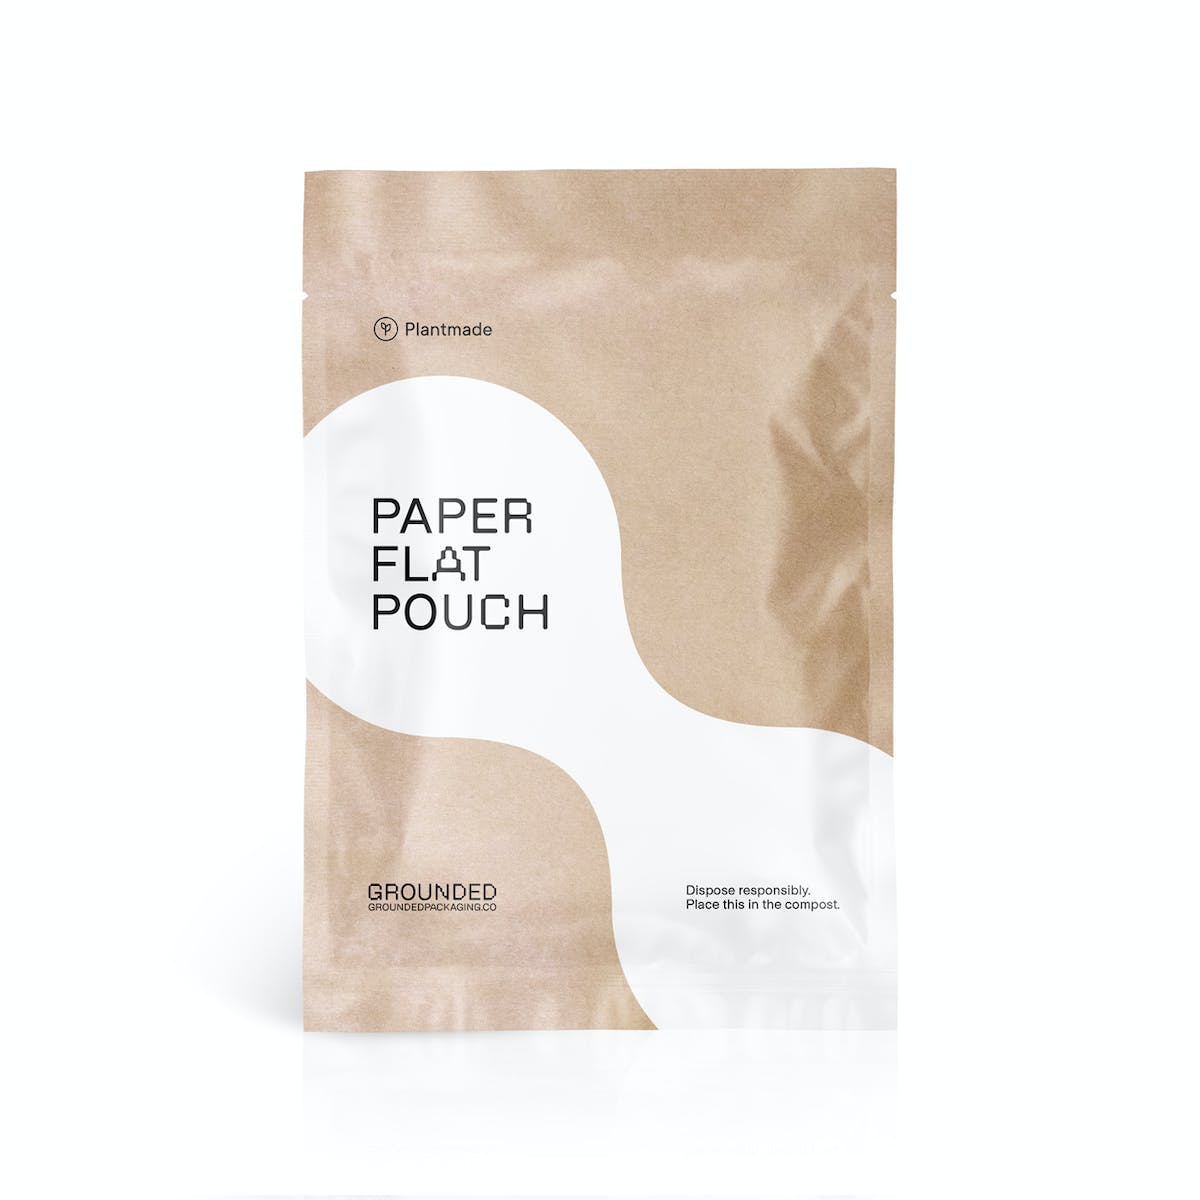 Plantmade™ paper flat pouch 1